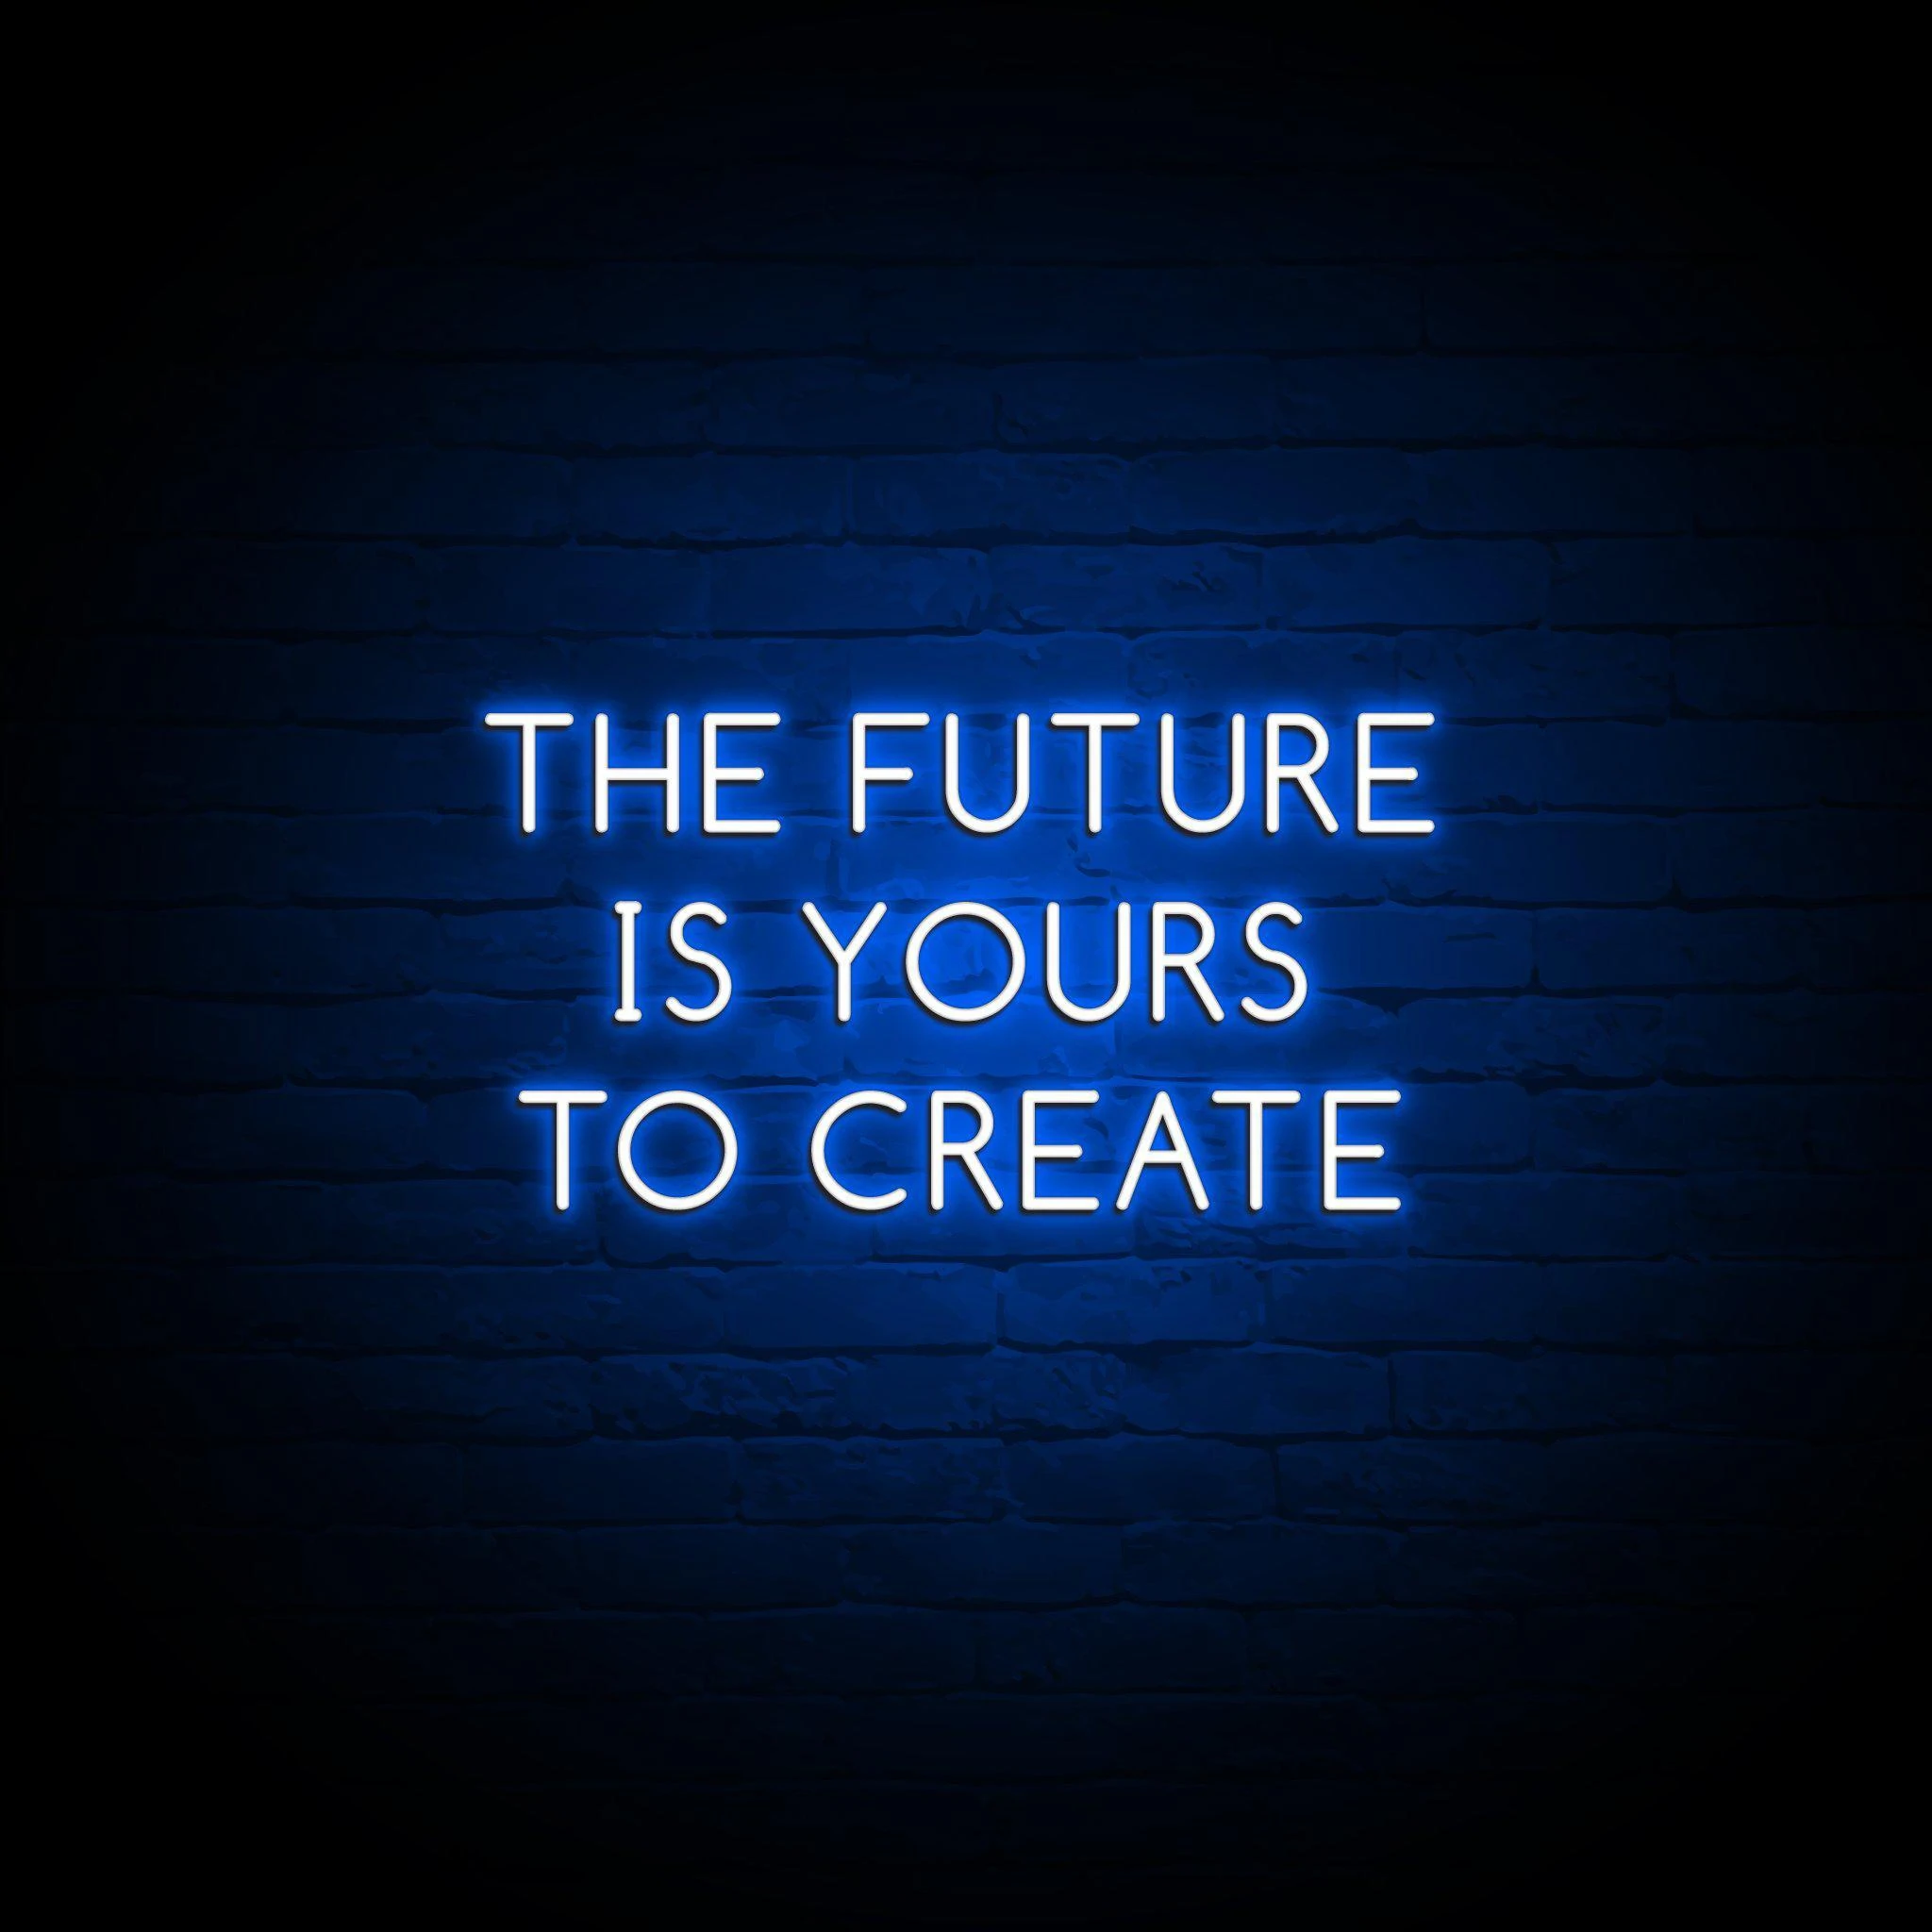 'THE FUTURE IS YOURS TO CREATE' NEON SIGN - NeonFerry